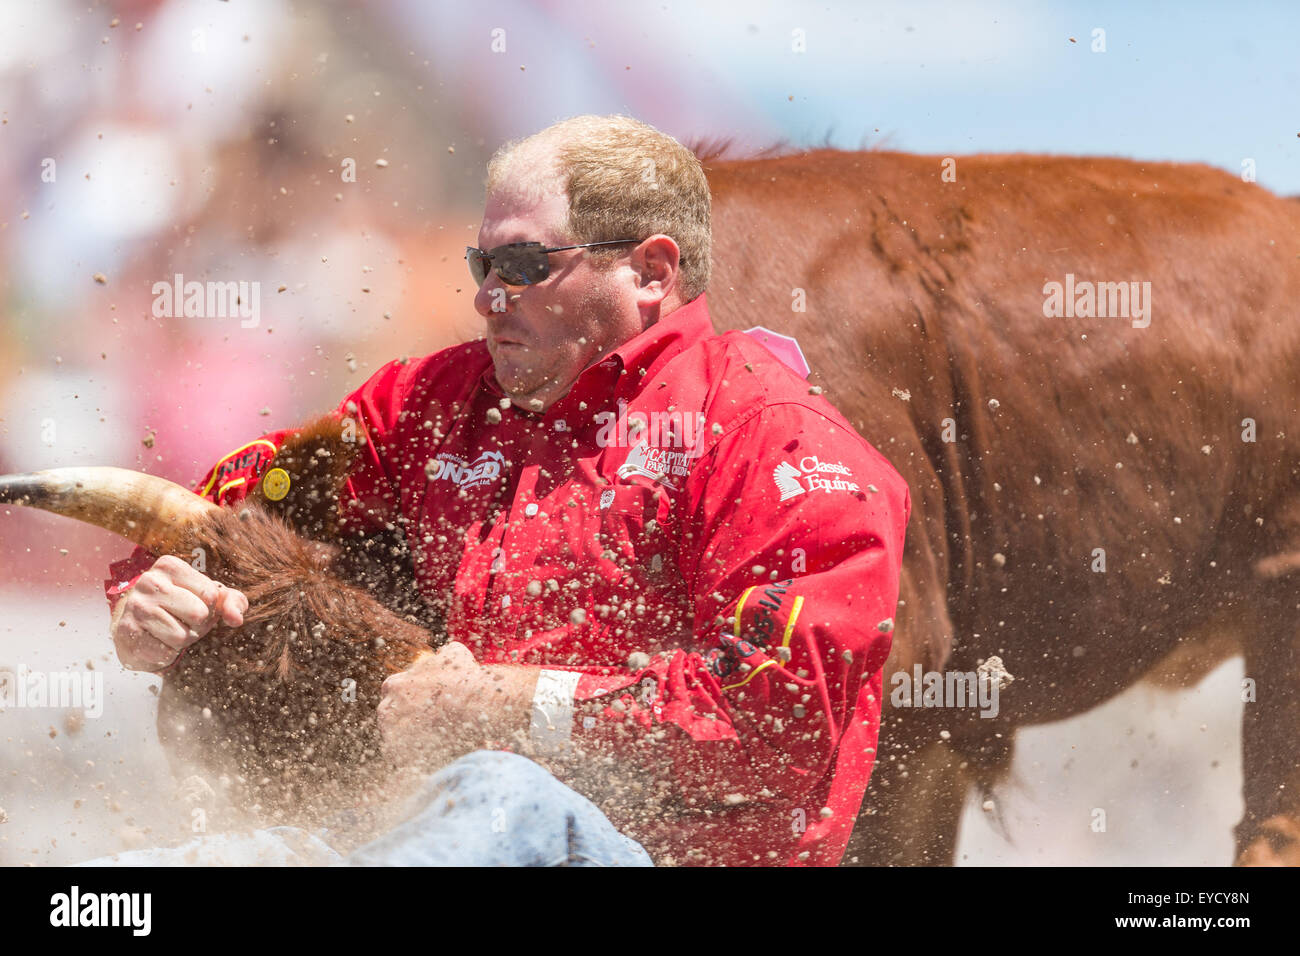 Cheyenne, Wyoming, USA. 26th July, 2015. Steer wrestler Hunter Cure grabs his steer by the horns during the Steer Wrestling finals at the Cheyenne Frontier Days rodeo in Frontier Park Arena July 26, 2015 in Cheyenne, Wyoming. Eldridge went on to win second place. Stock Photo